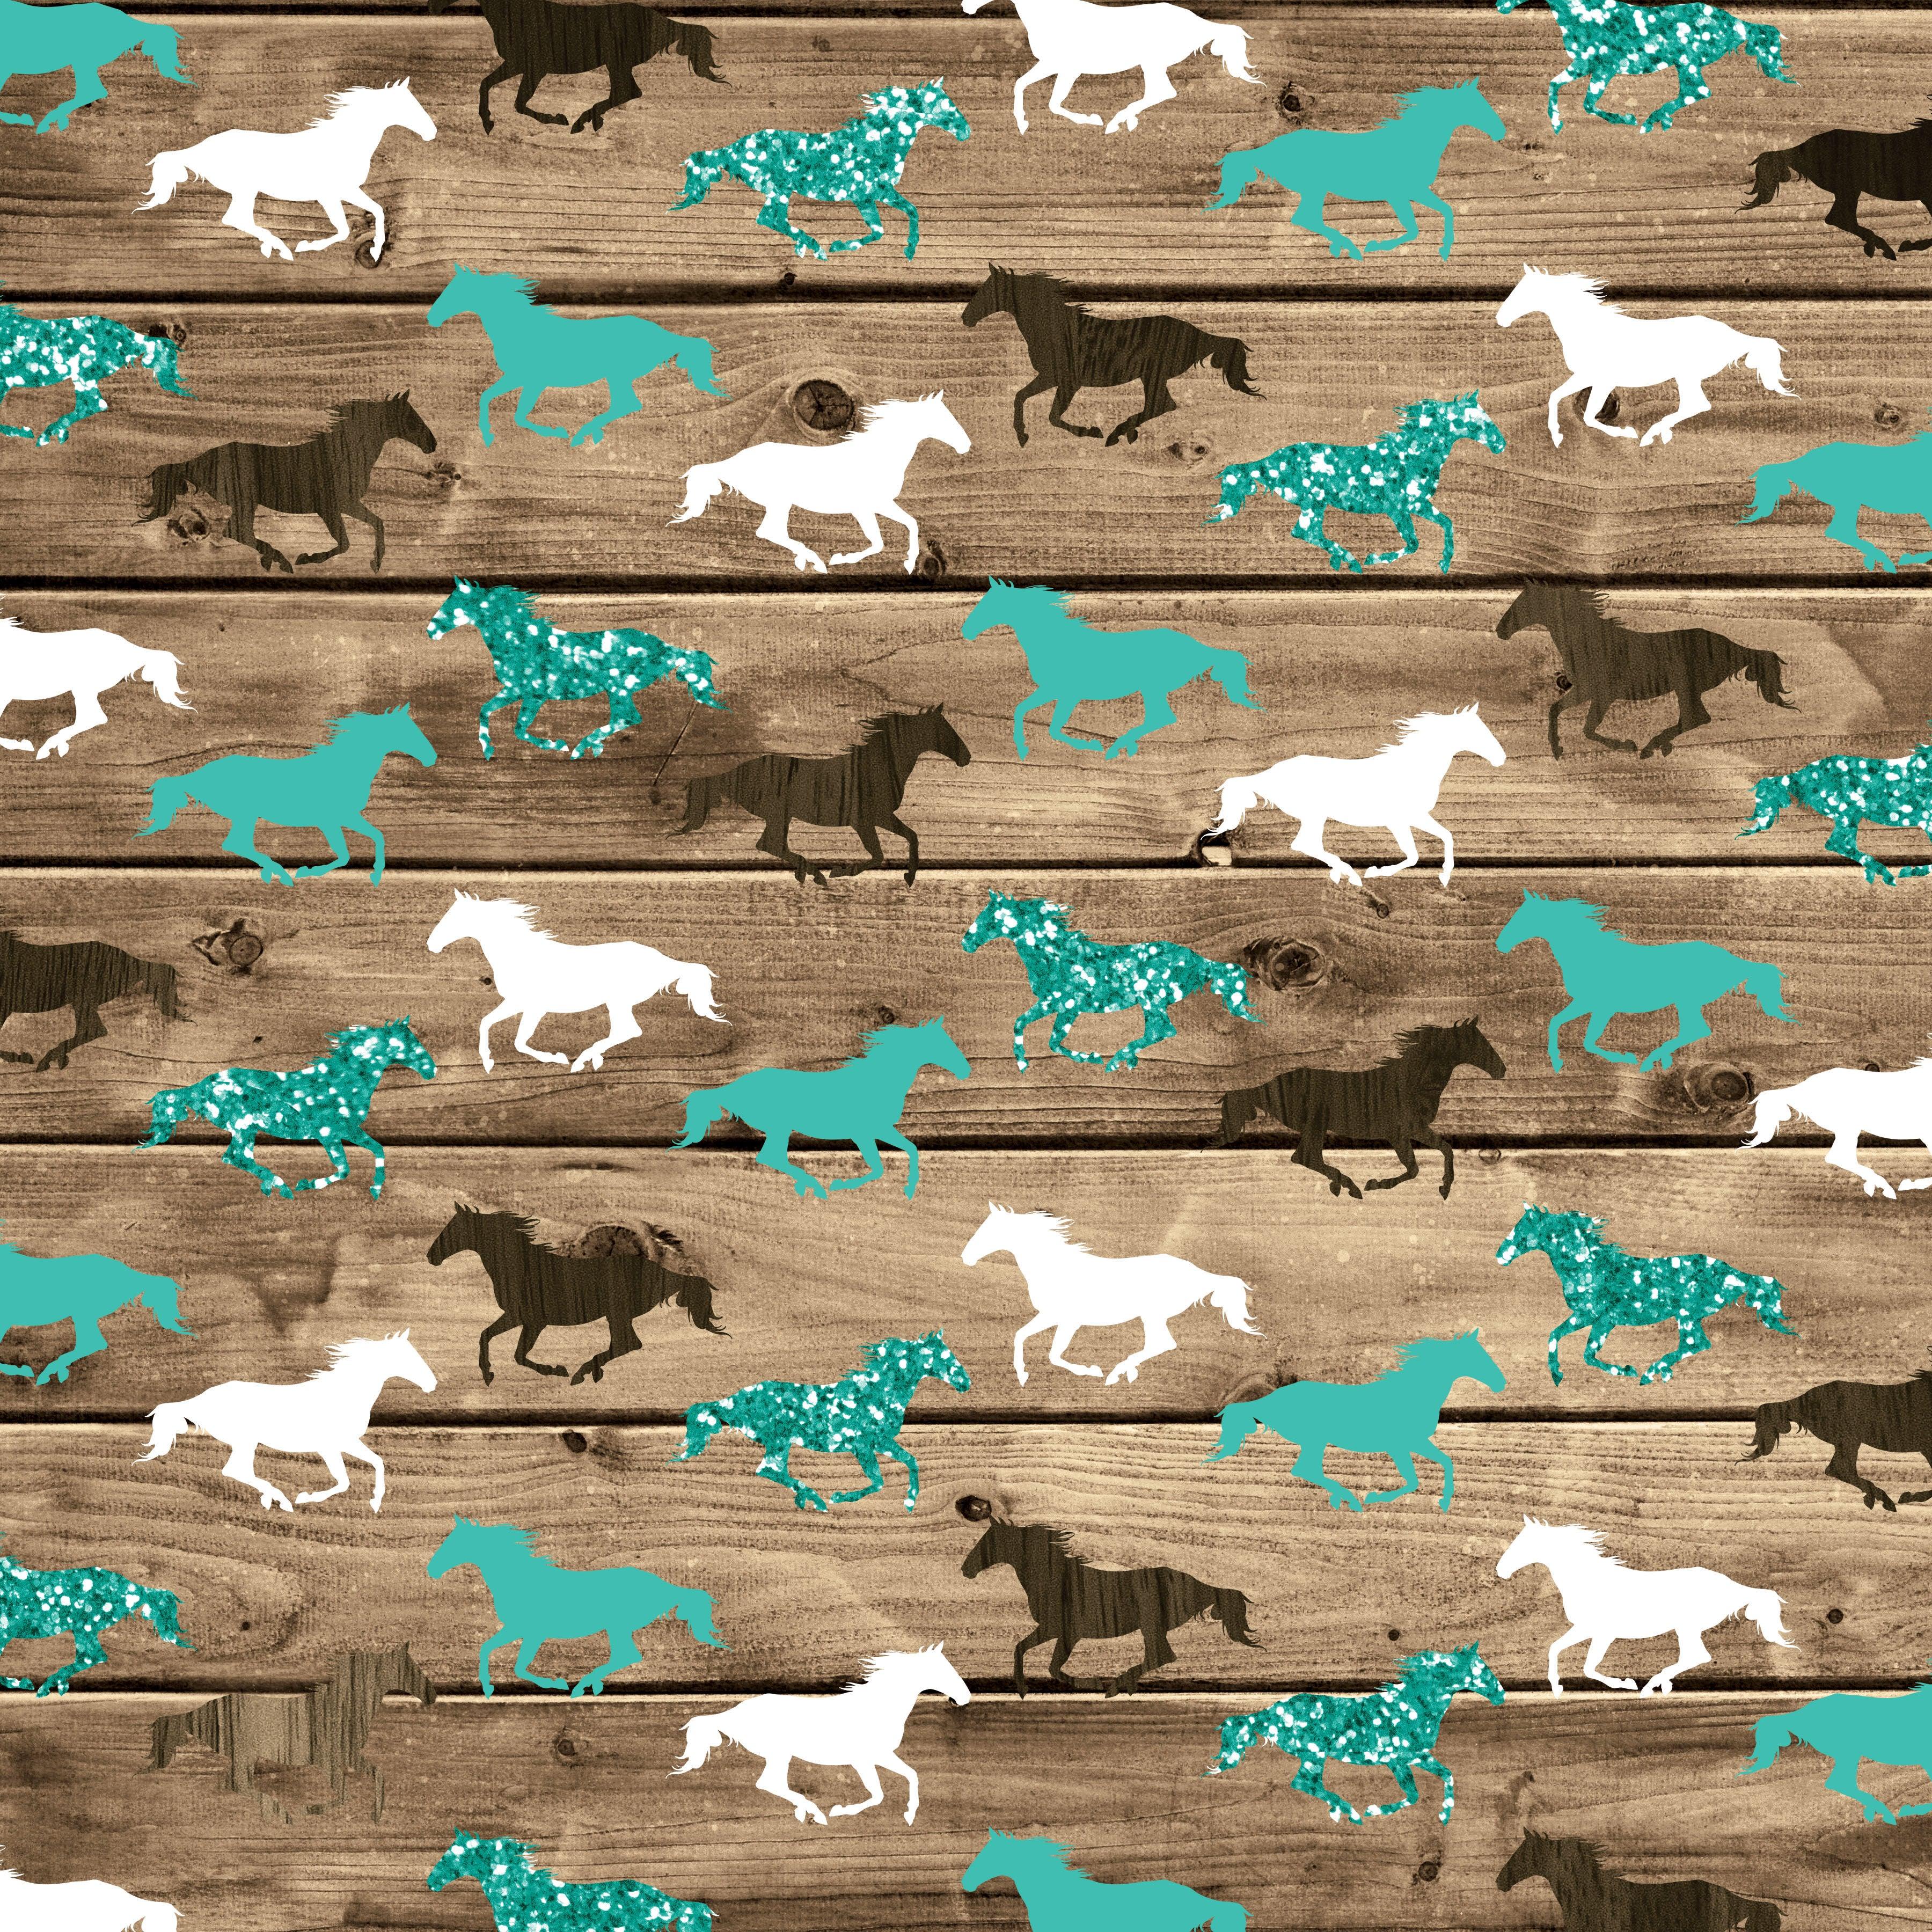 Cowgirls Collection Wild Horses 12 x 12 Double-Sided Scrapbook Paper by SSC Designs